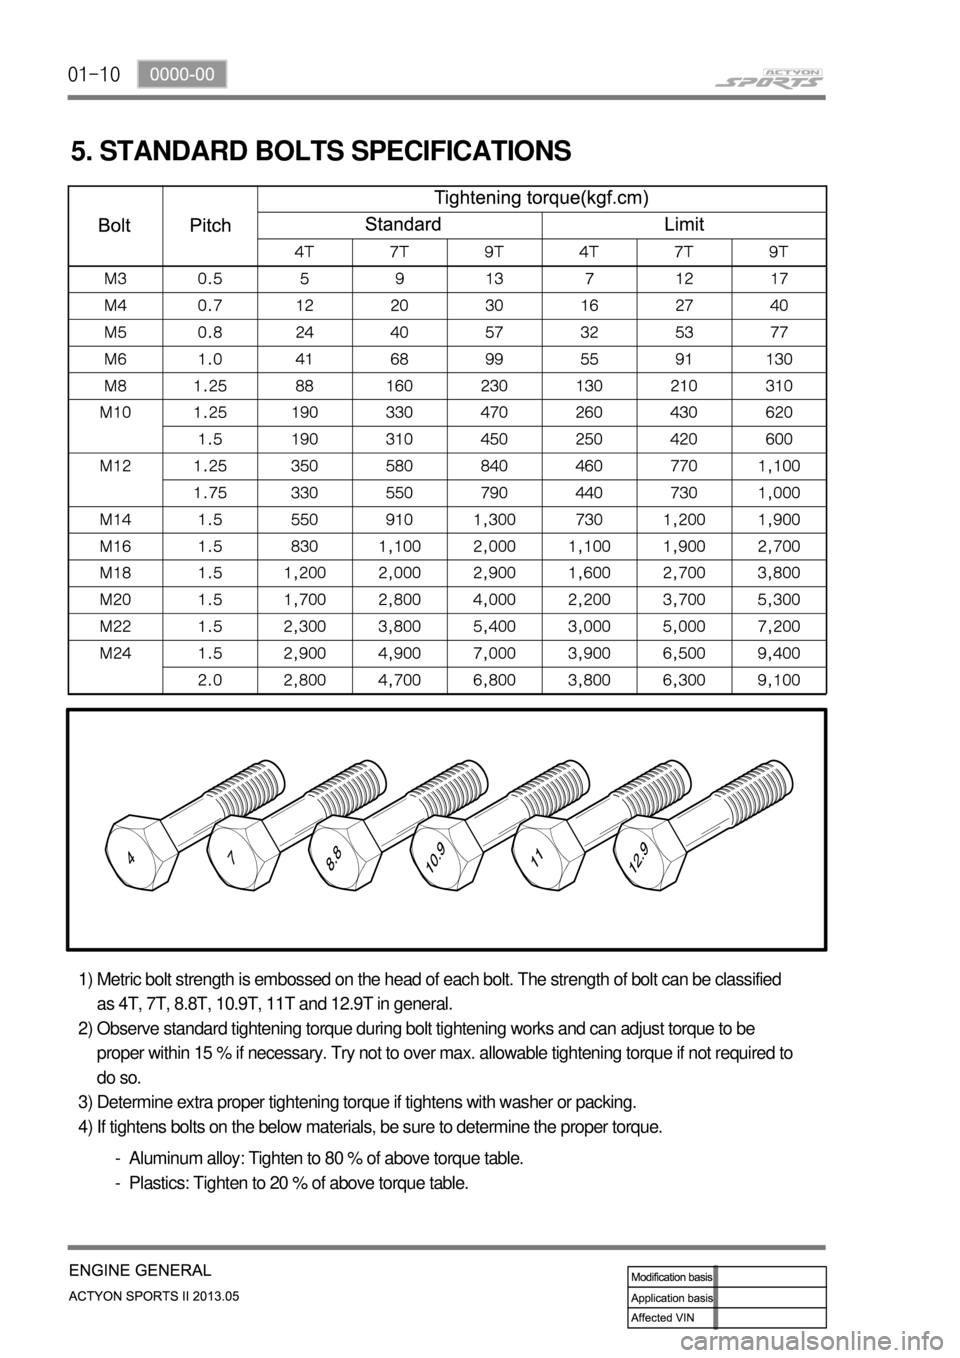 SSANGYONG NEW ACTYON SPORTS 2013 Owners Manual 01-10
5. STANDARD BOLTS SPECIFICATIONS
Metric bolt strength is embossed on the head of each bolt. The strength of bolt can be classified 
as 4T, 7T, 8.8T, 10.9T, 11T and 12.9T in general.
Observe stan